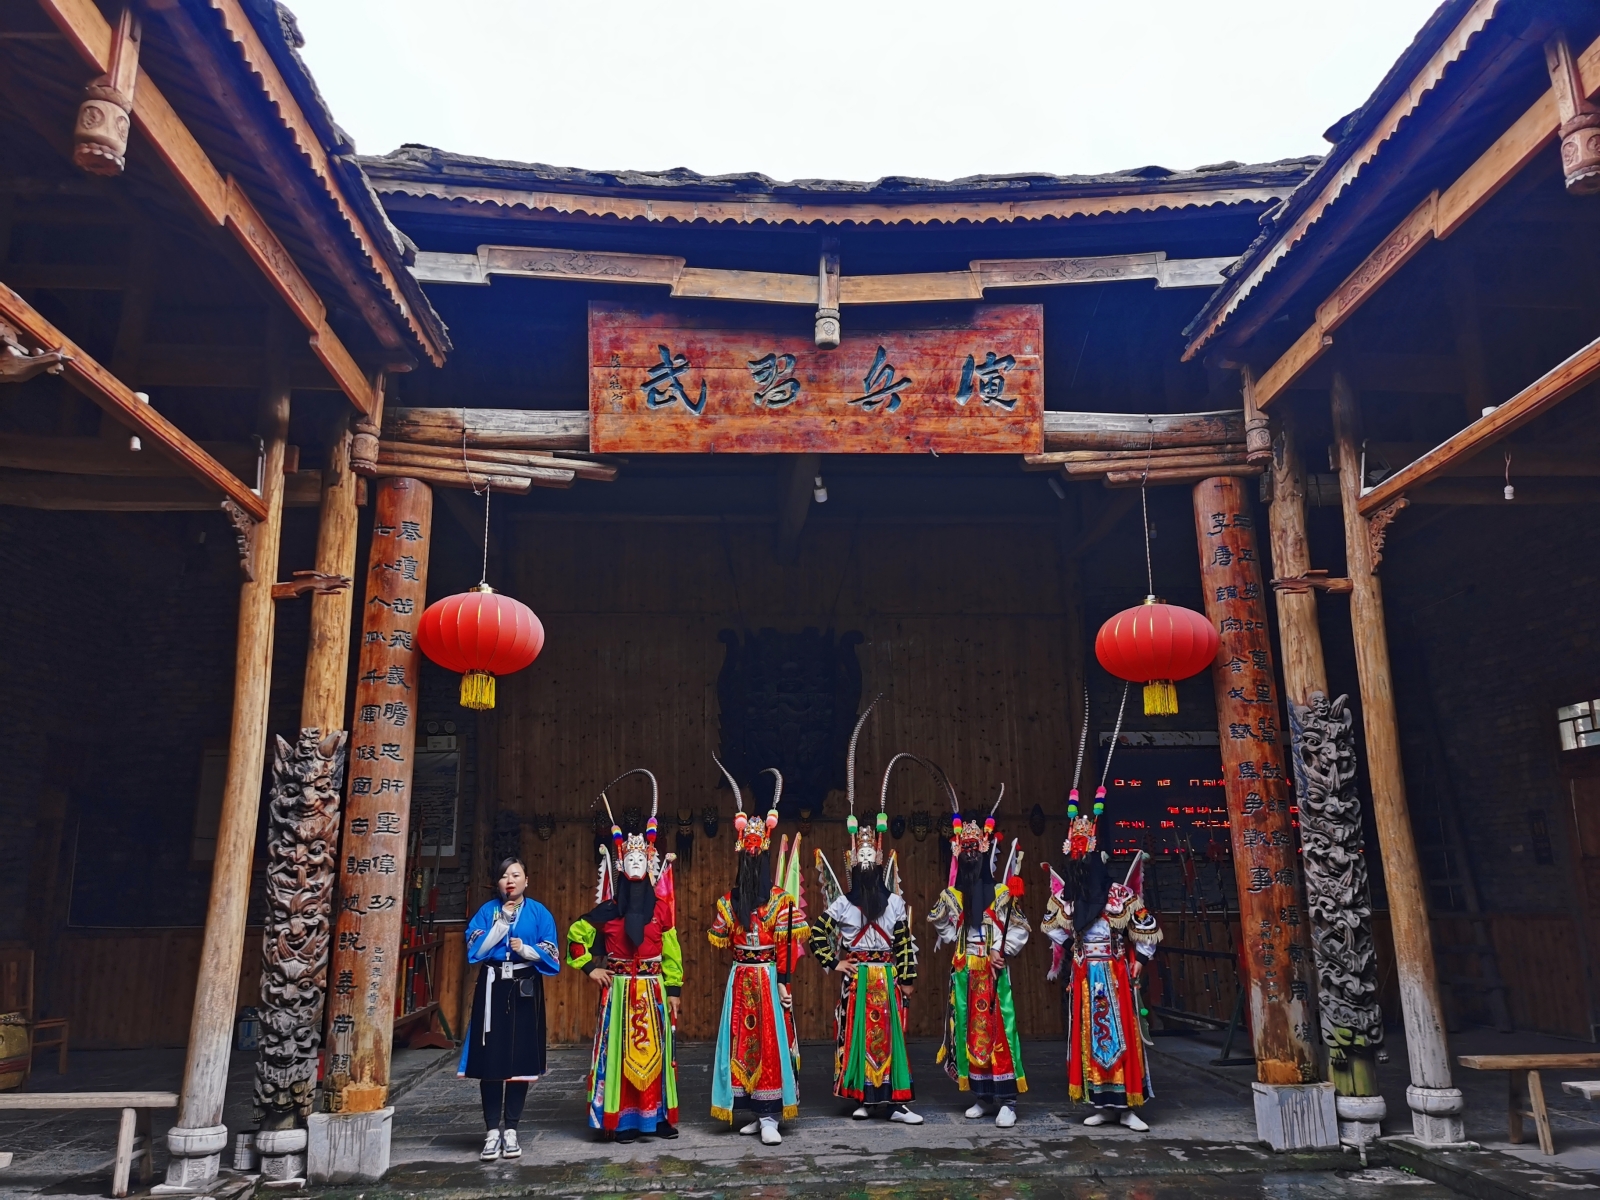 Local residents stage a performance of dixi opera, or ground opera, at Tianlong Tunpu town in Anshun, southwest China's Guizhou Province on August 27, 2023. /CGTN